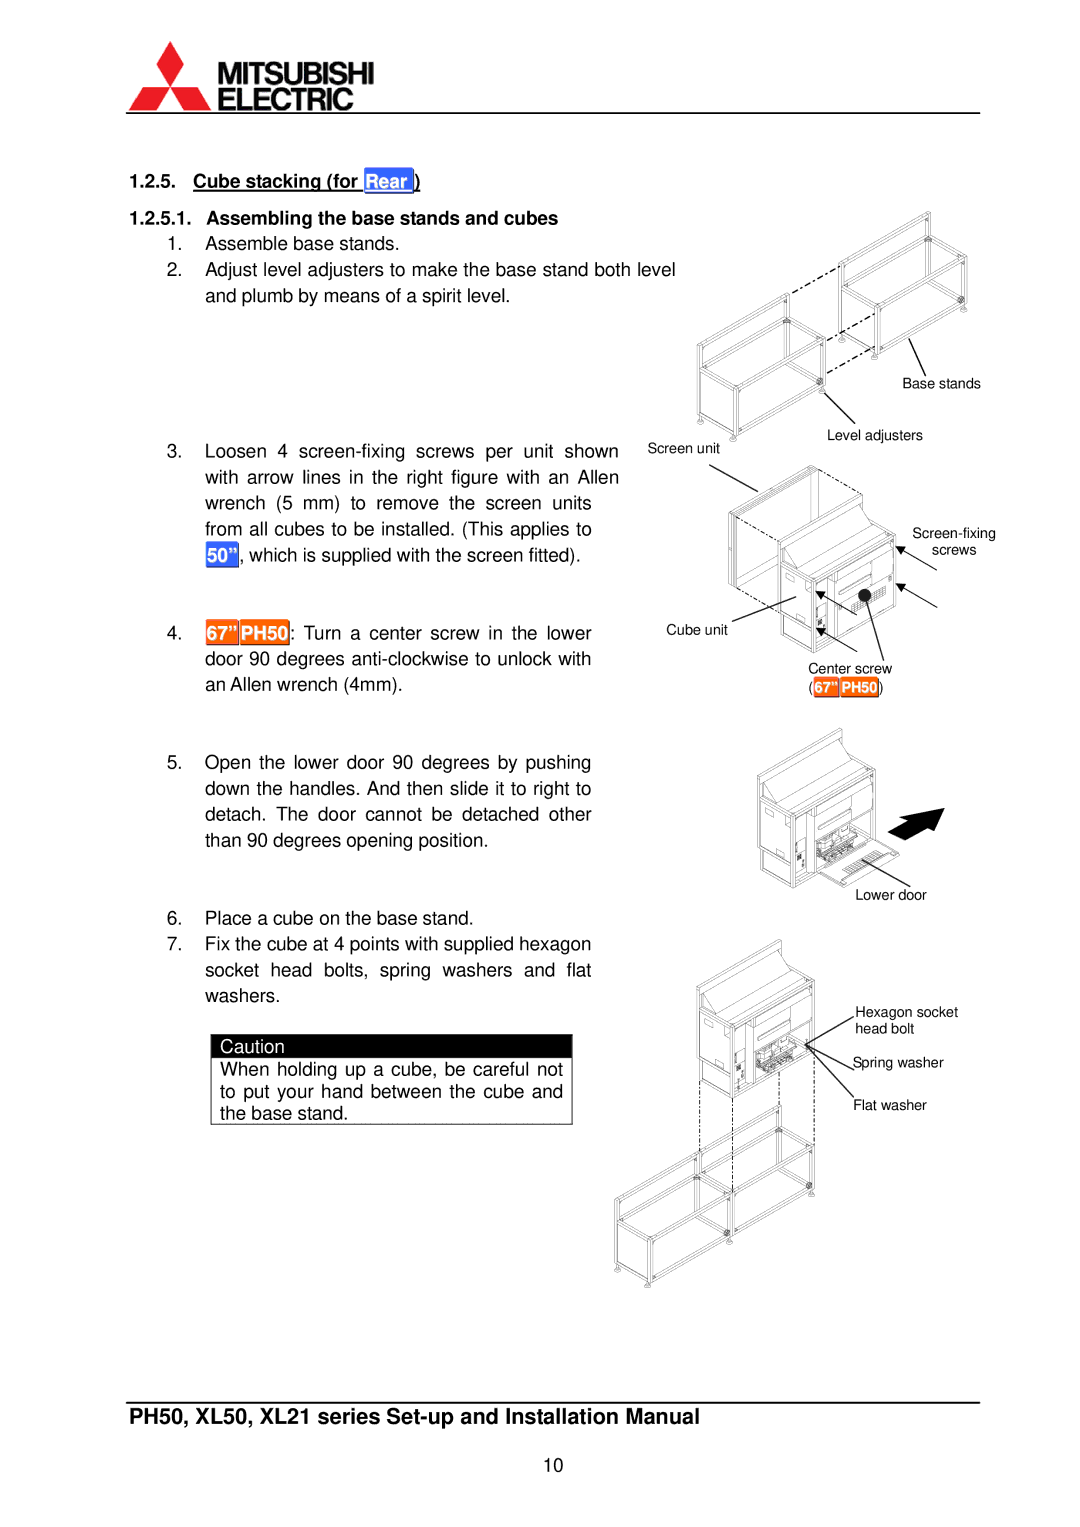 Mitsubishi Electronics XL50, XL21 installation manual Cube stacking for Rear Assembling the base stands and cubes, PH50 